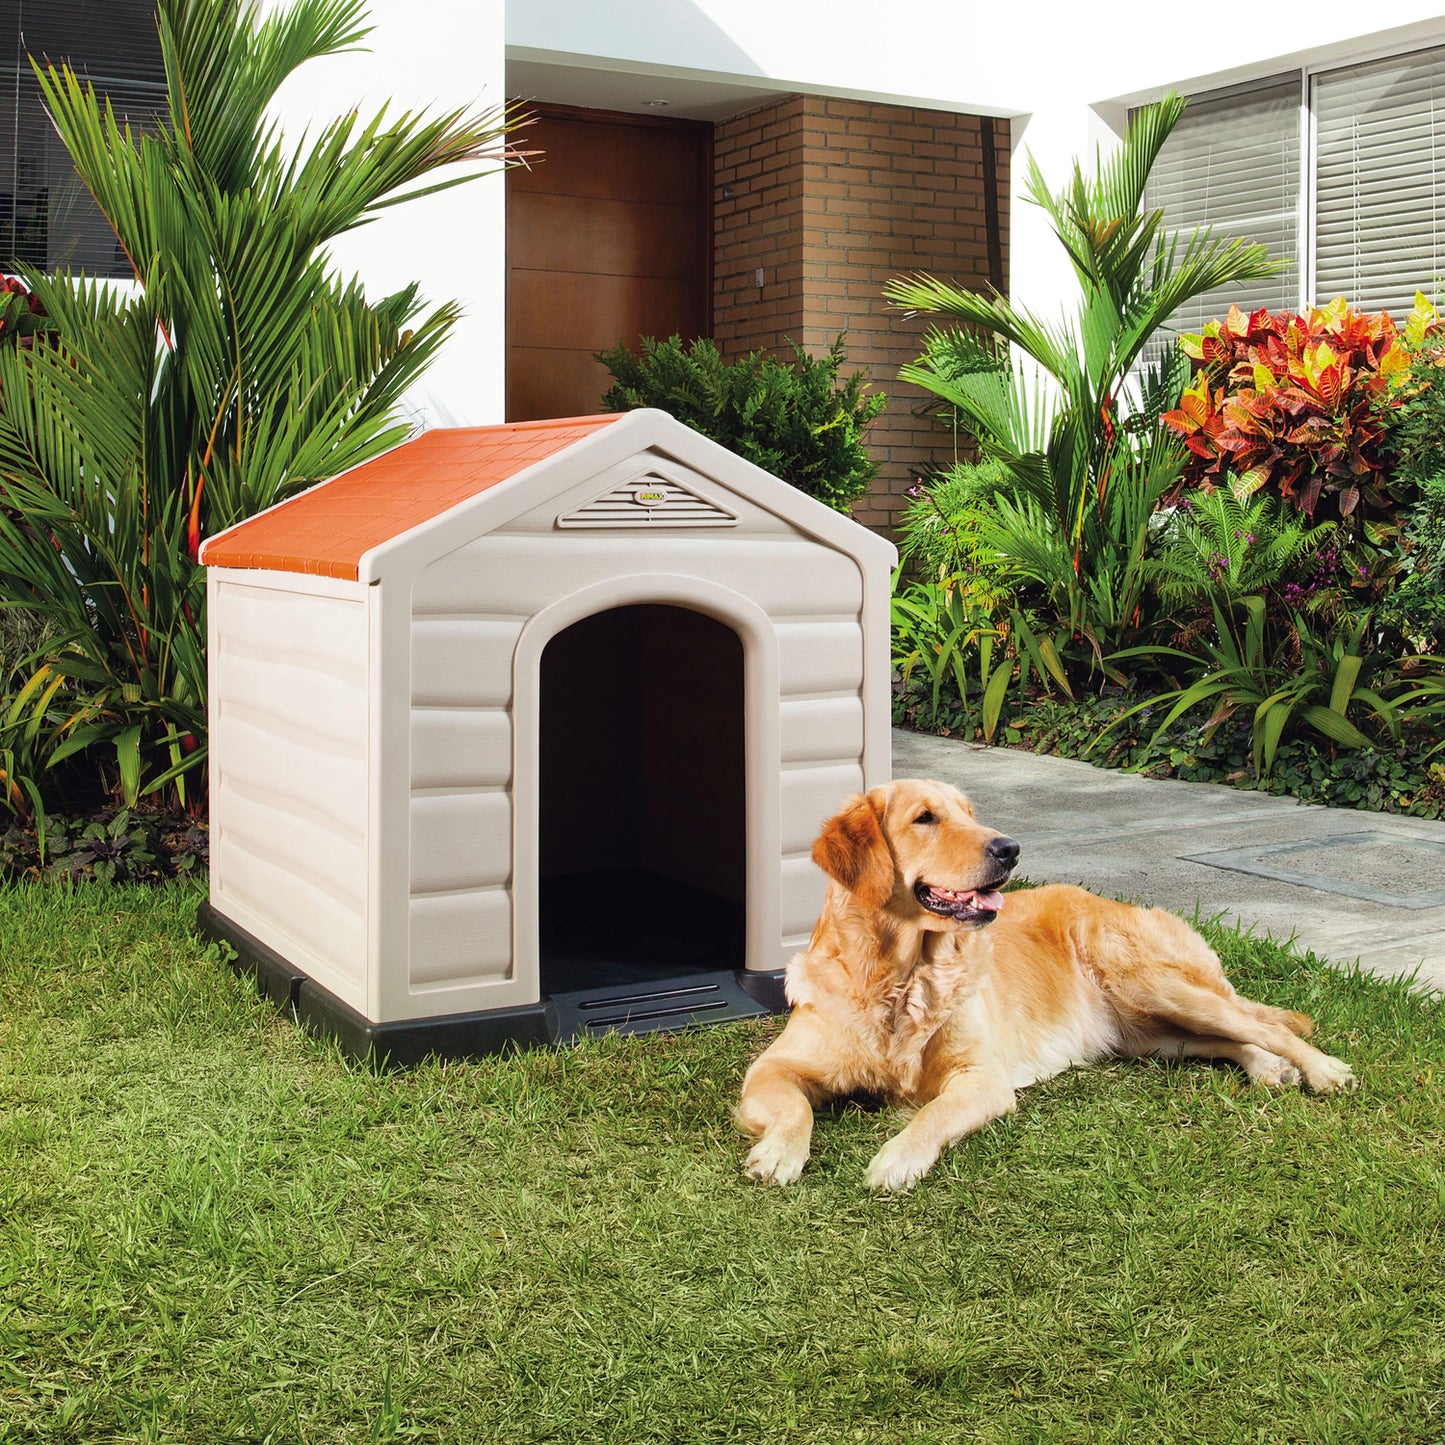 Rimax Resin Dog House for Small Breeds, Taupe, 23" H X 24" W X 26" D